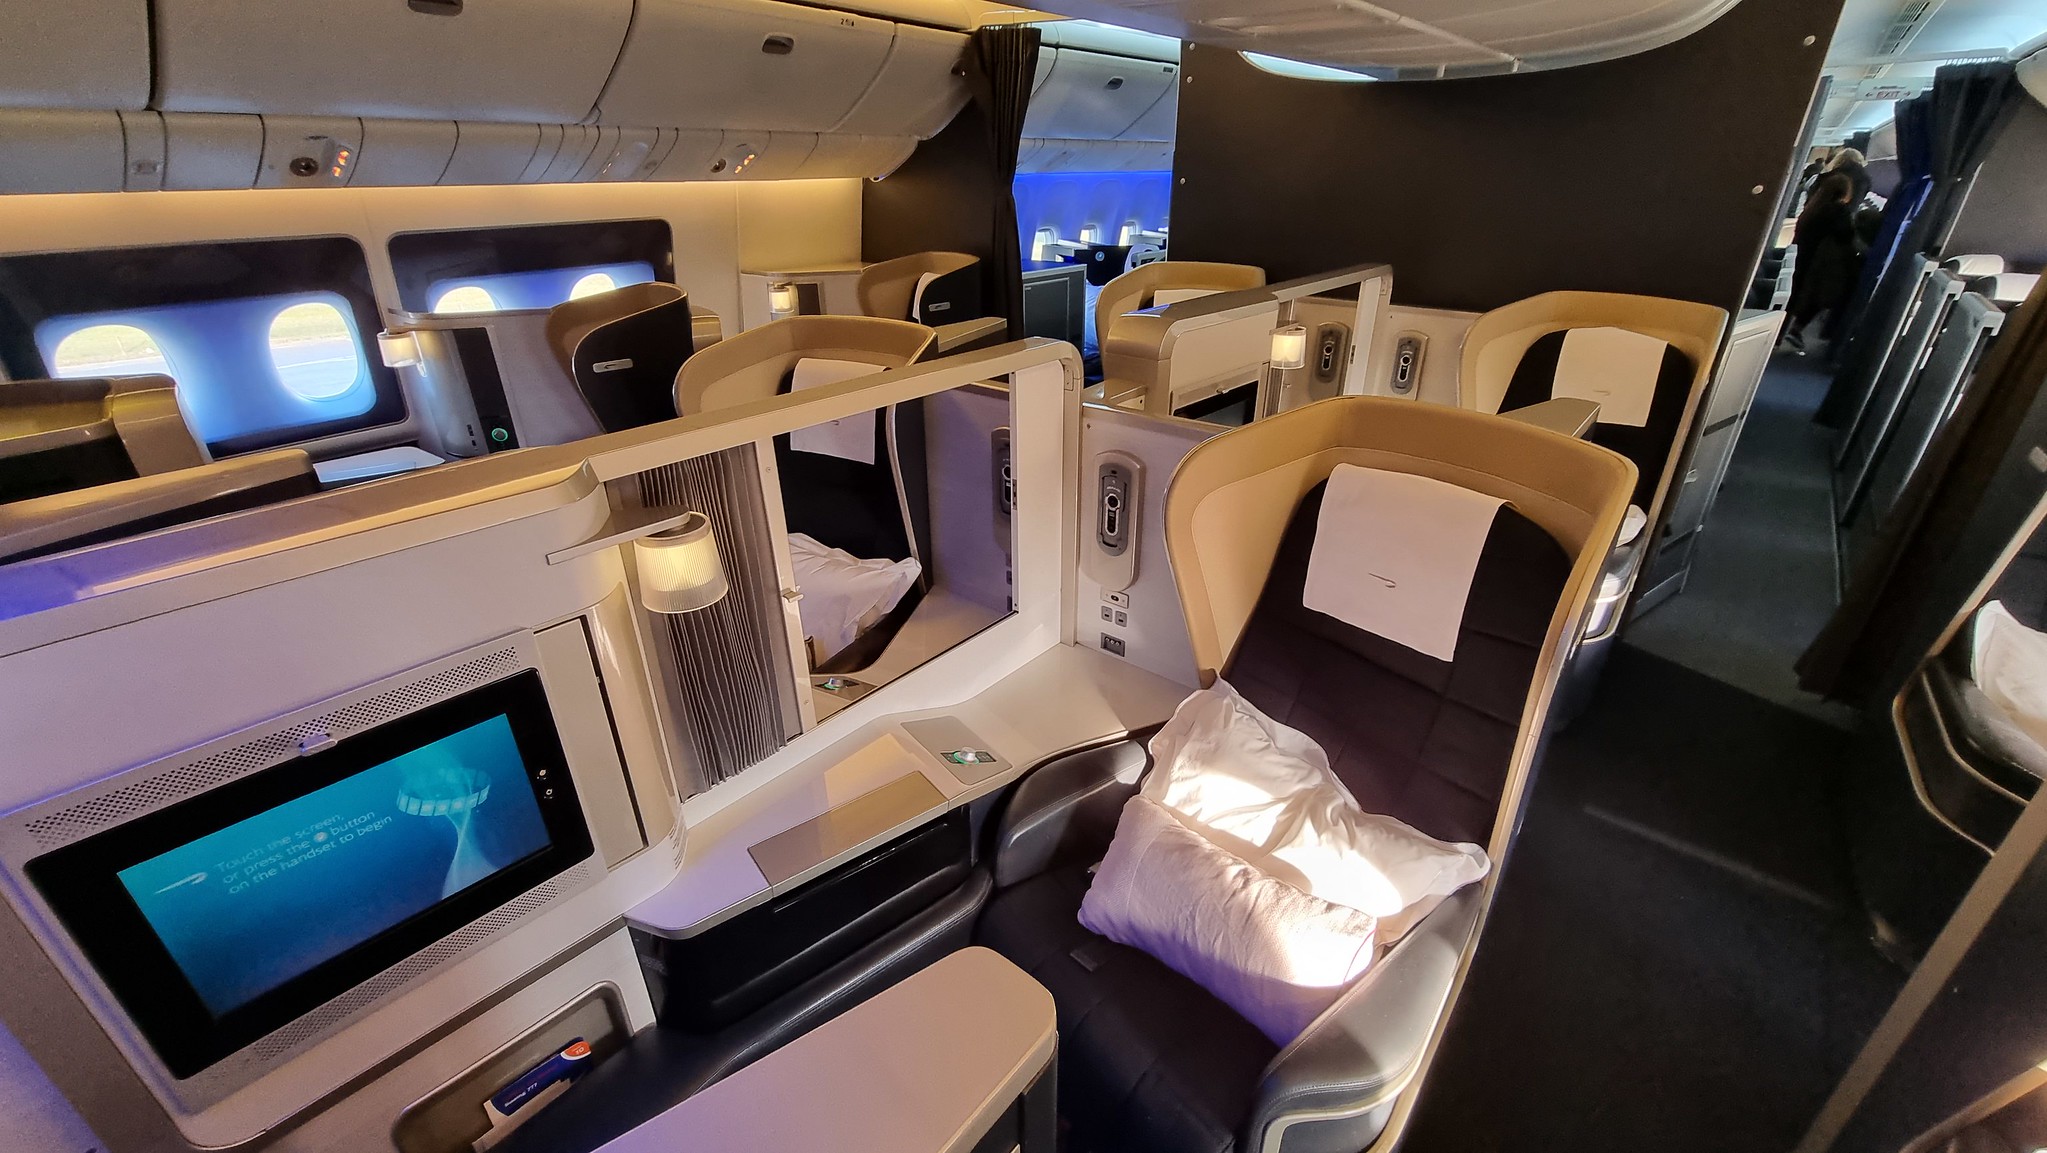 A view of the old First Class cabin on the 777-200